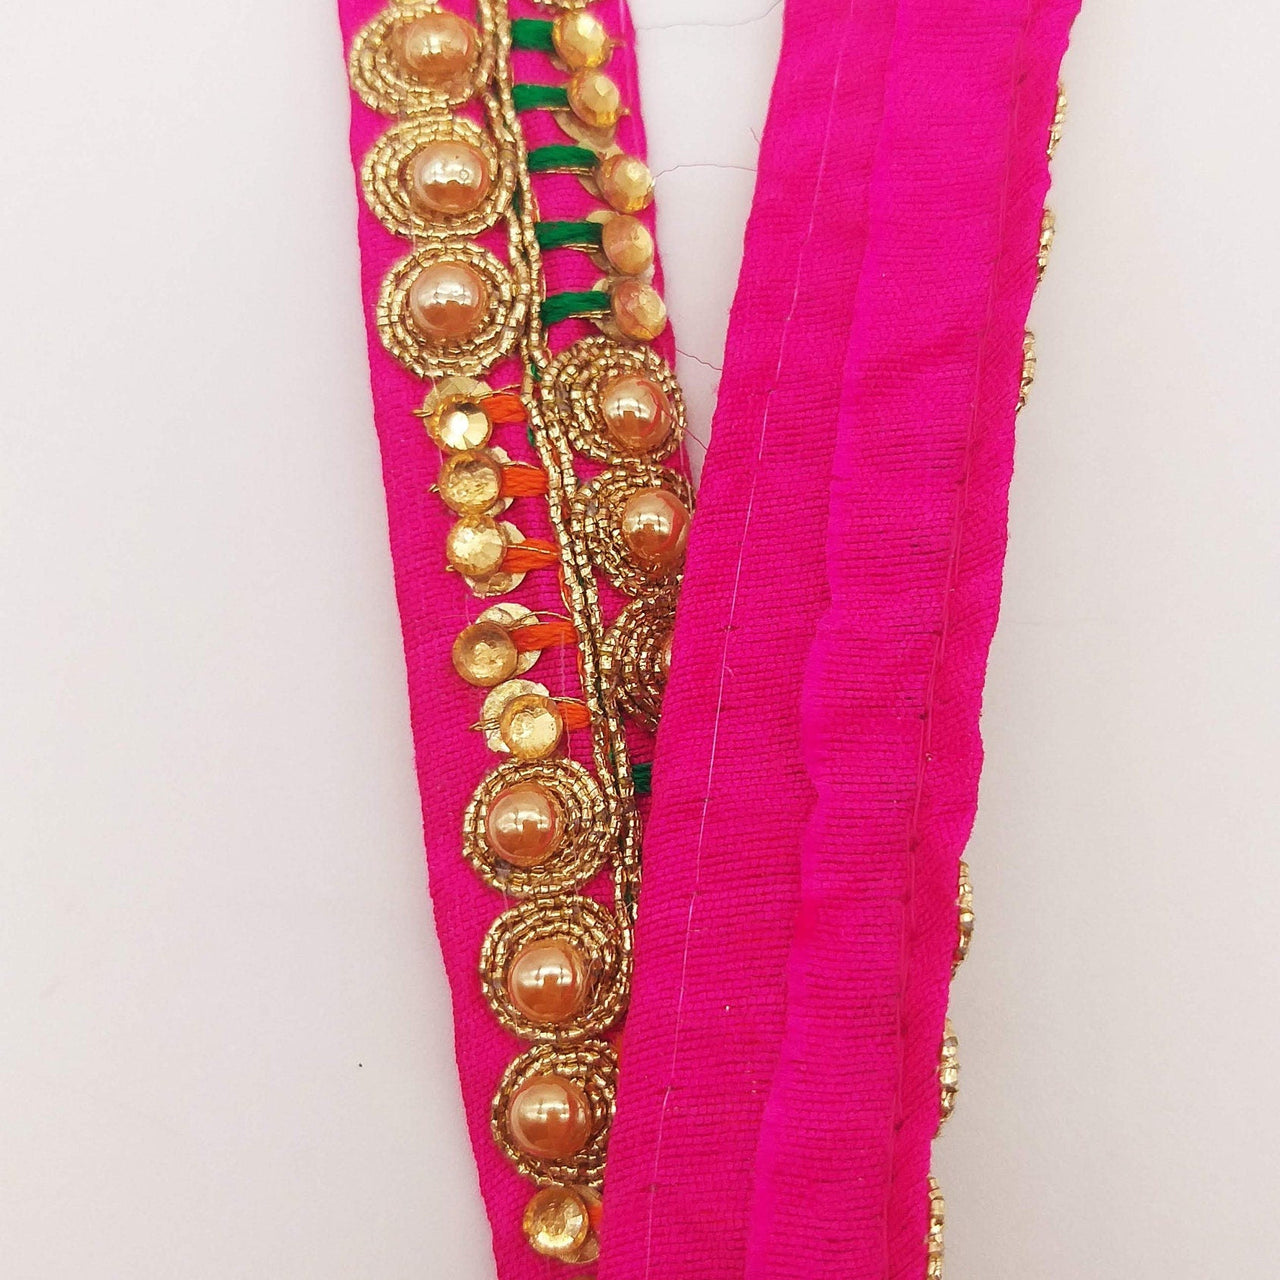 Fuchsia Pink Fabric Embroidered Trim with Gold Beads, Decorative Sari Trim, Trim By 3 Yards